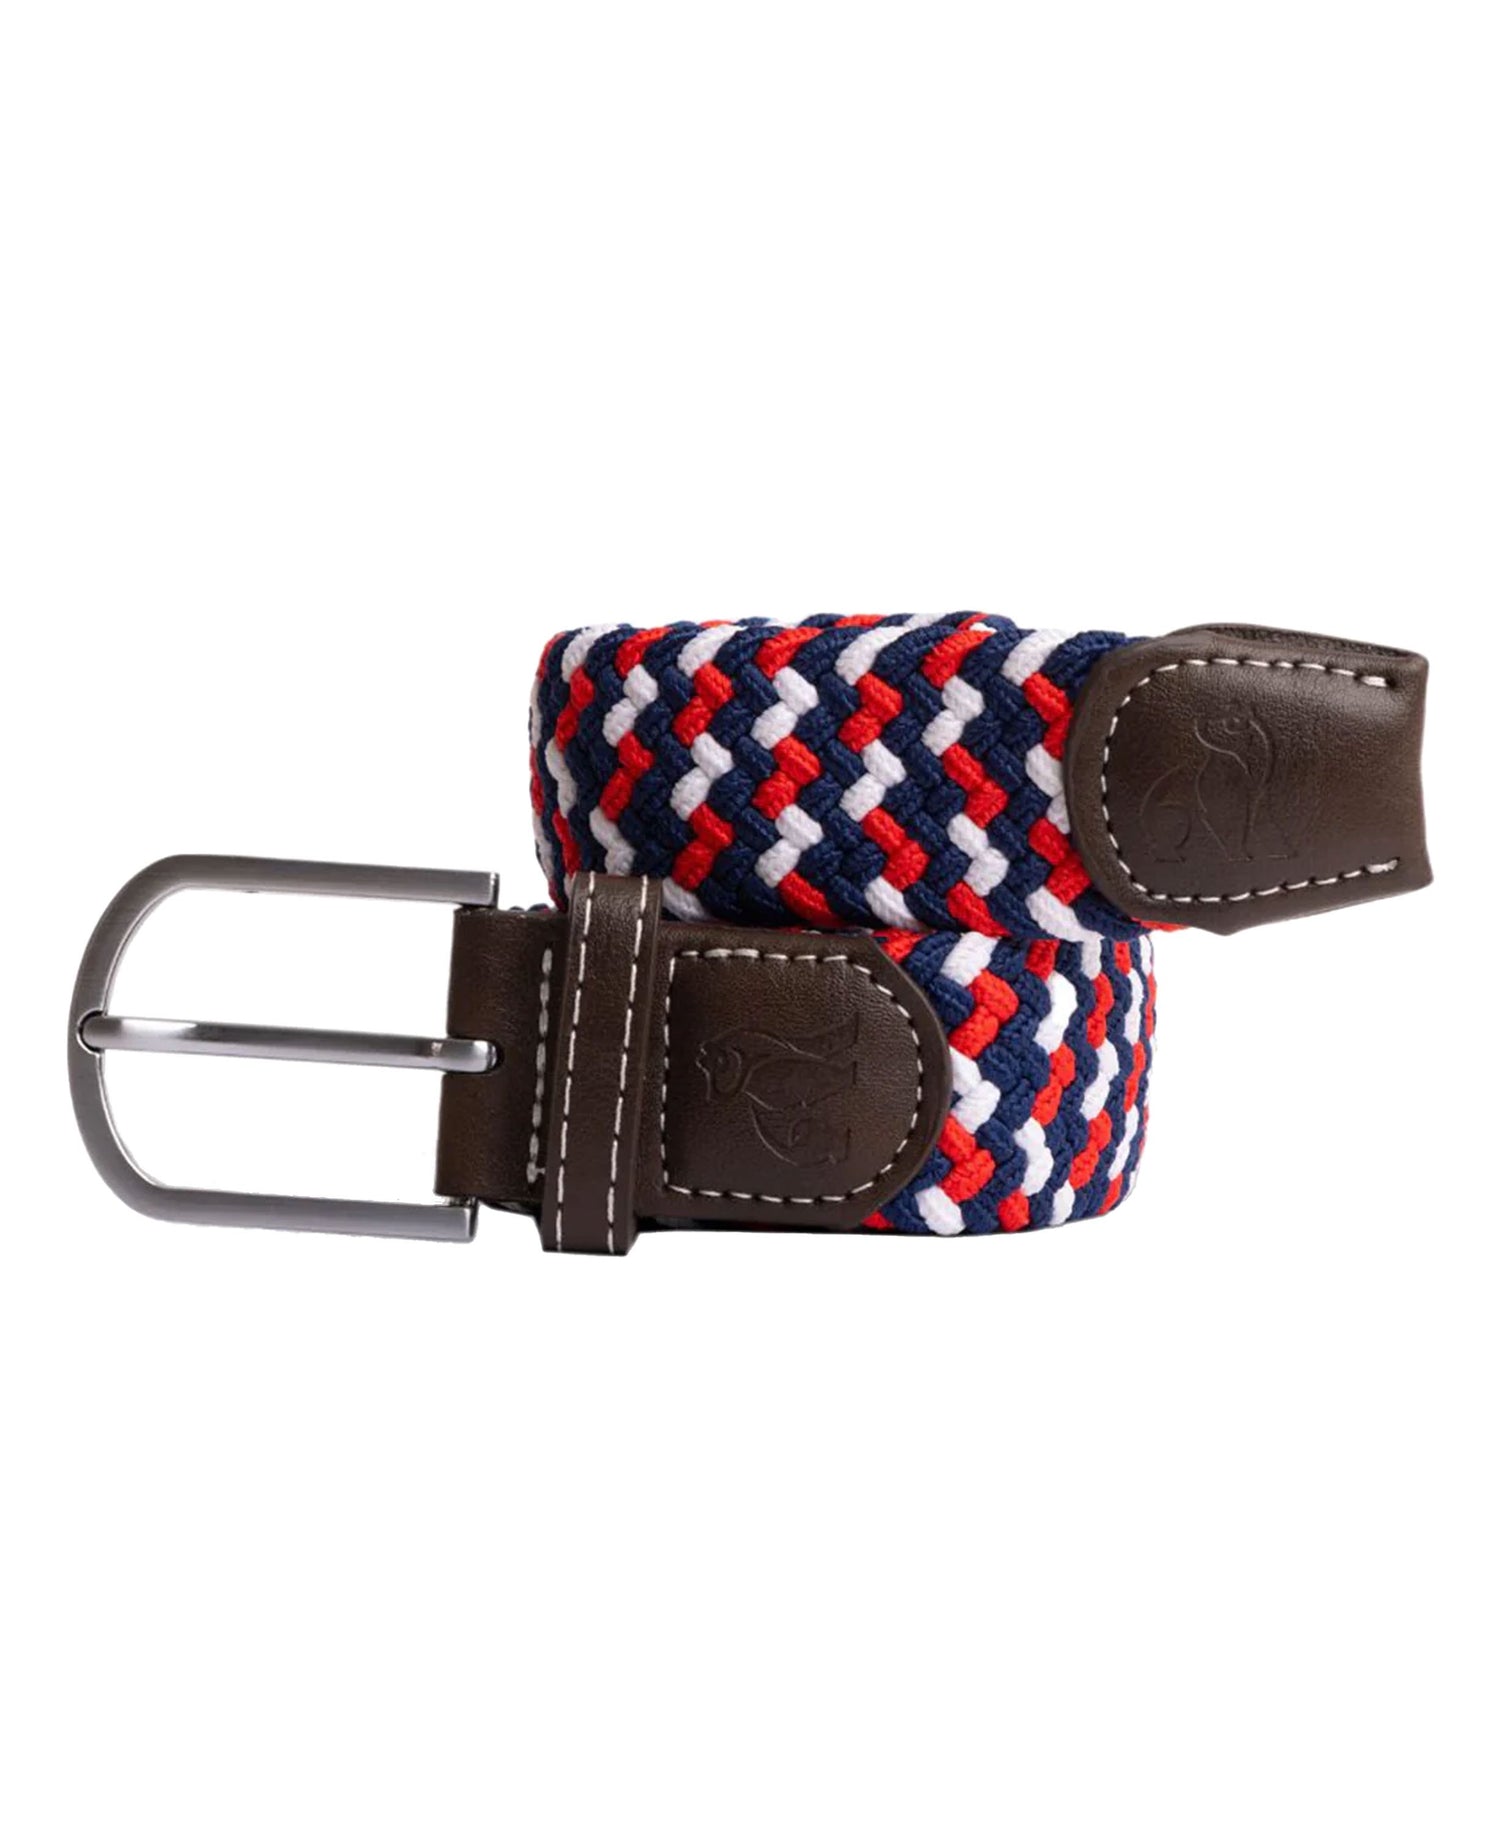 Woven Belt - Blue/Red/White Zigzag